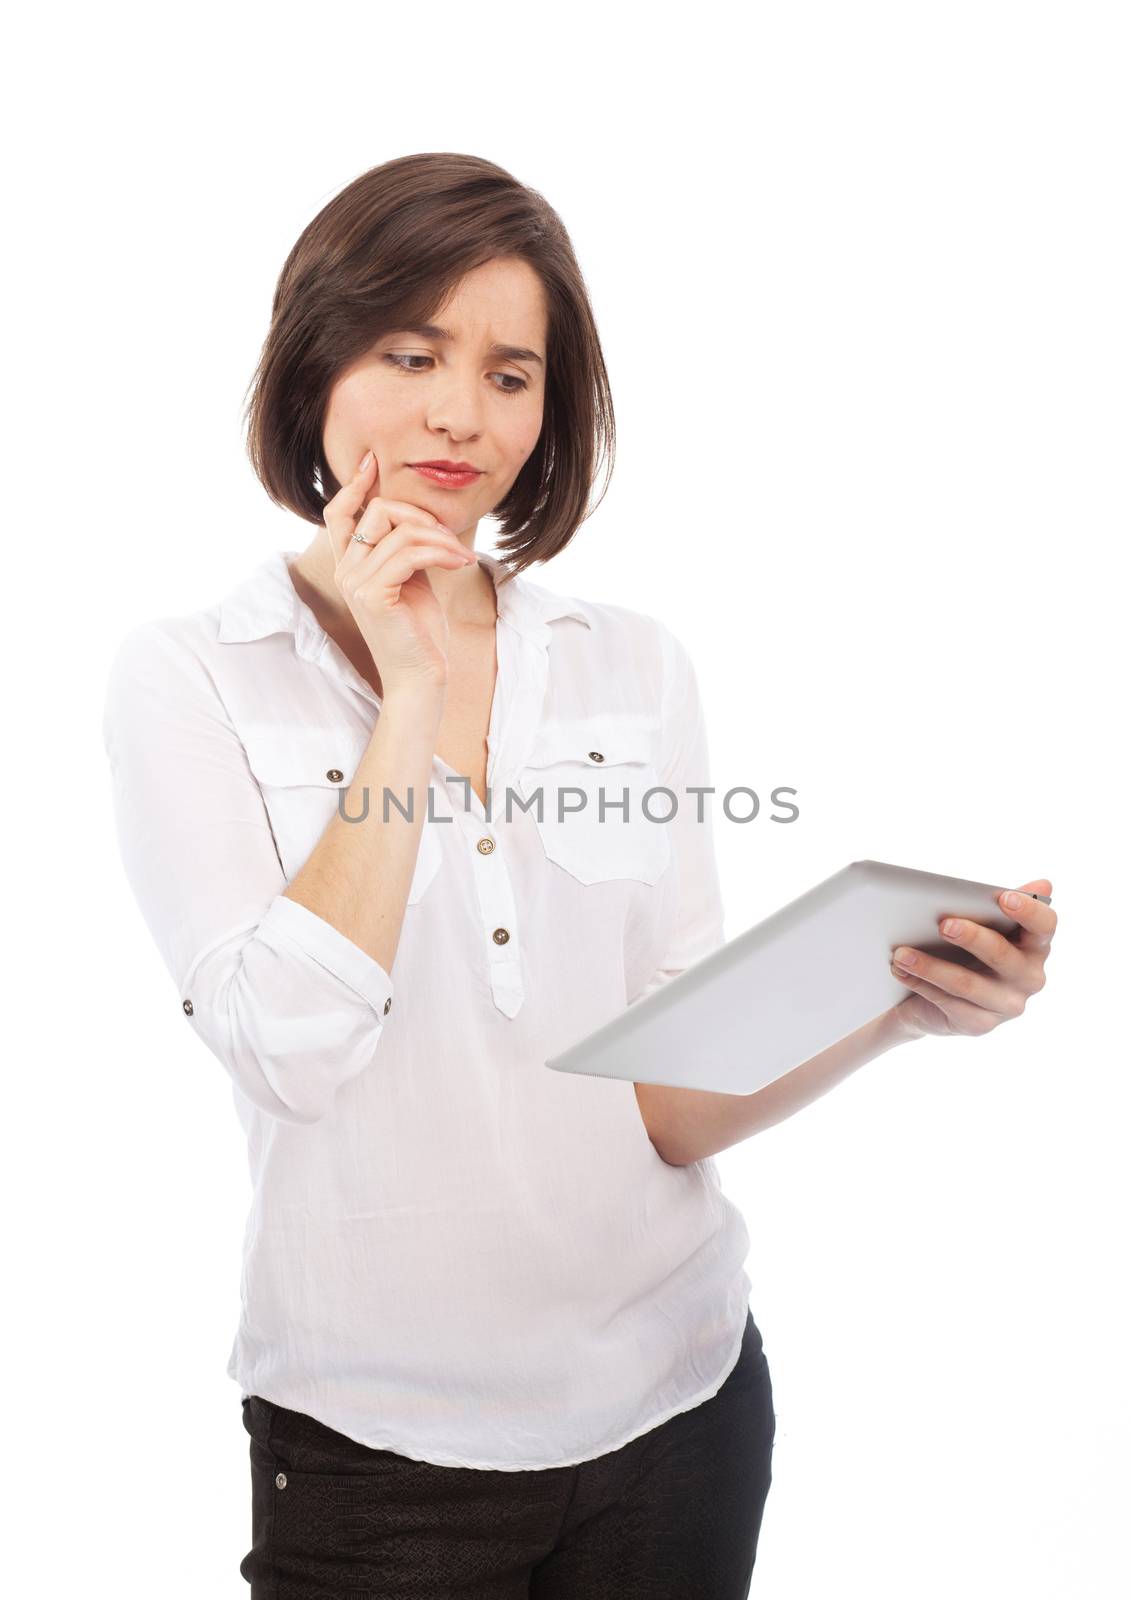 Woman holding an electronic tablet and looking doubtful by TristanBM